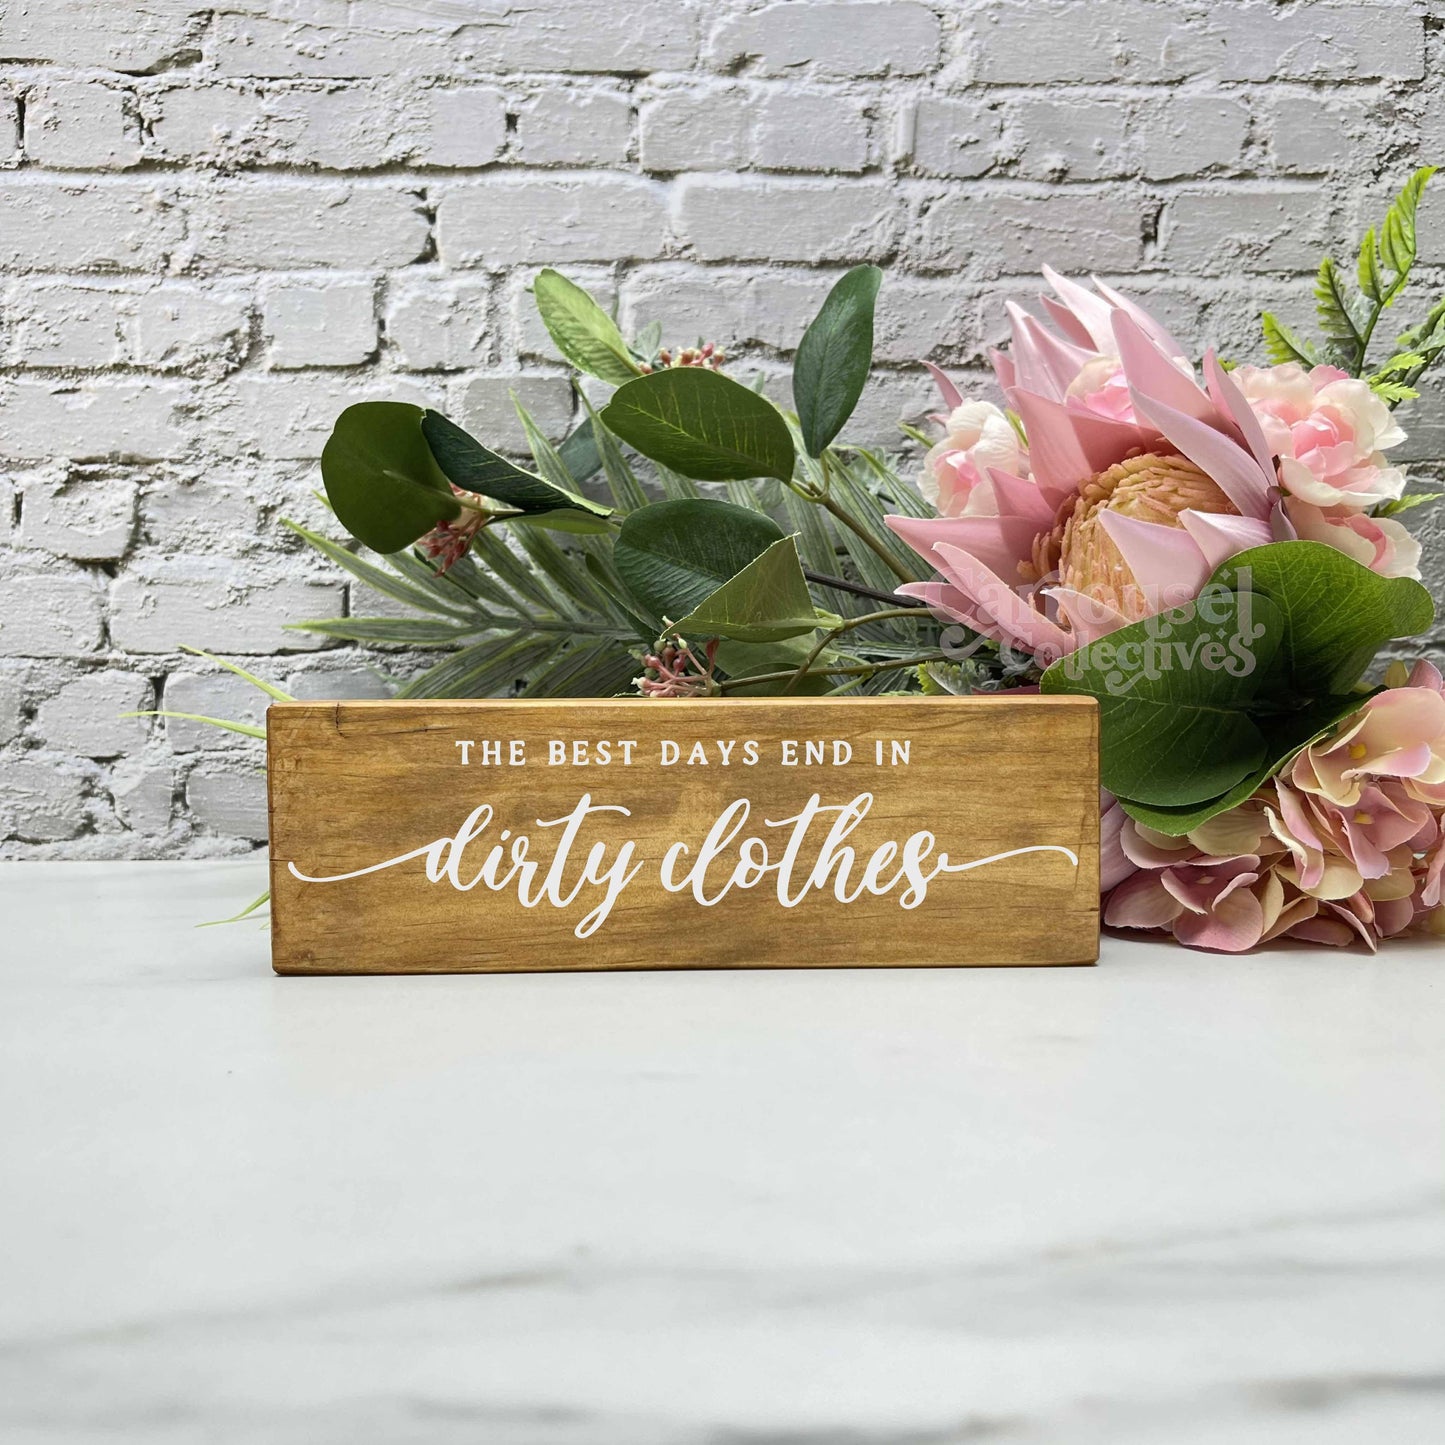 Best days end in dirty clothes, laundry wood sign, laundry decor, home decor